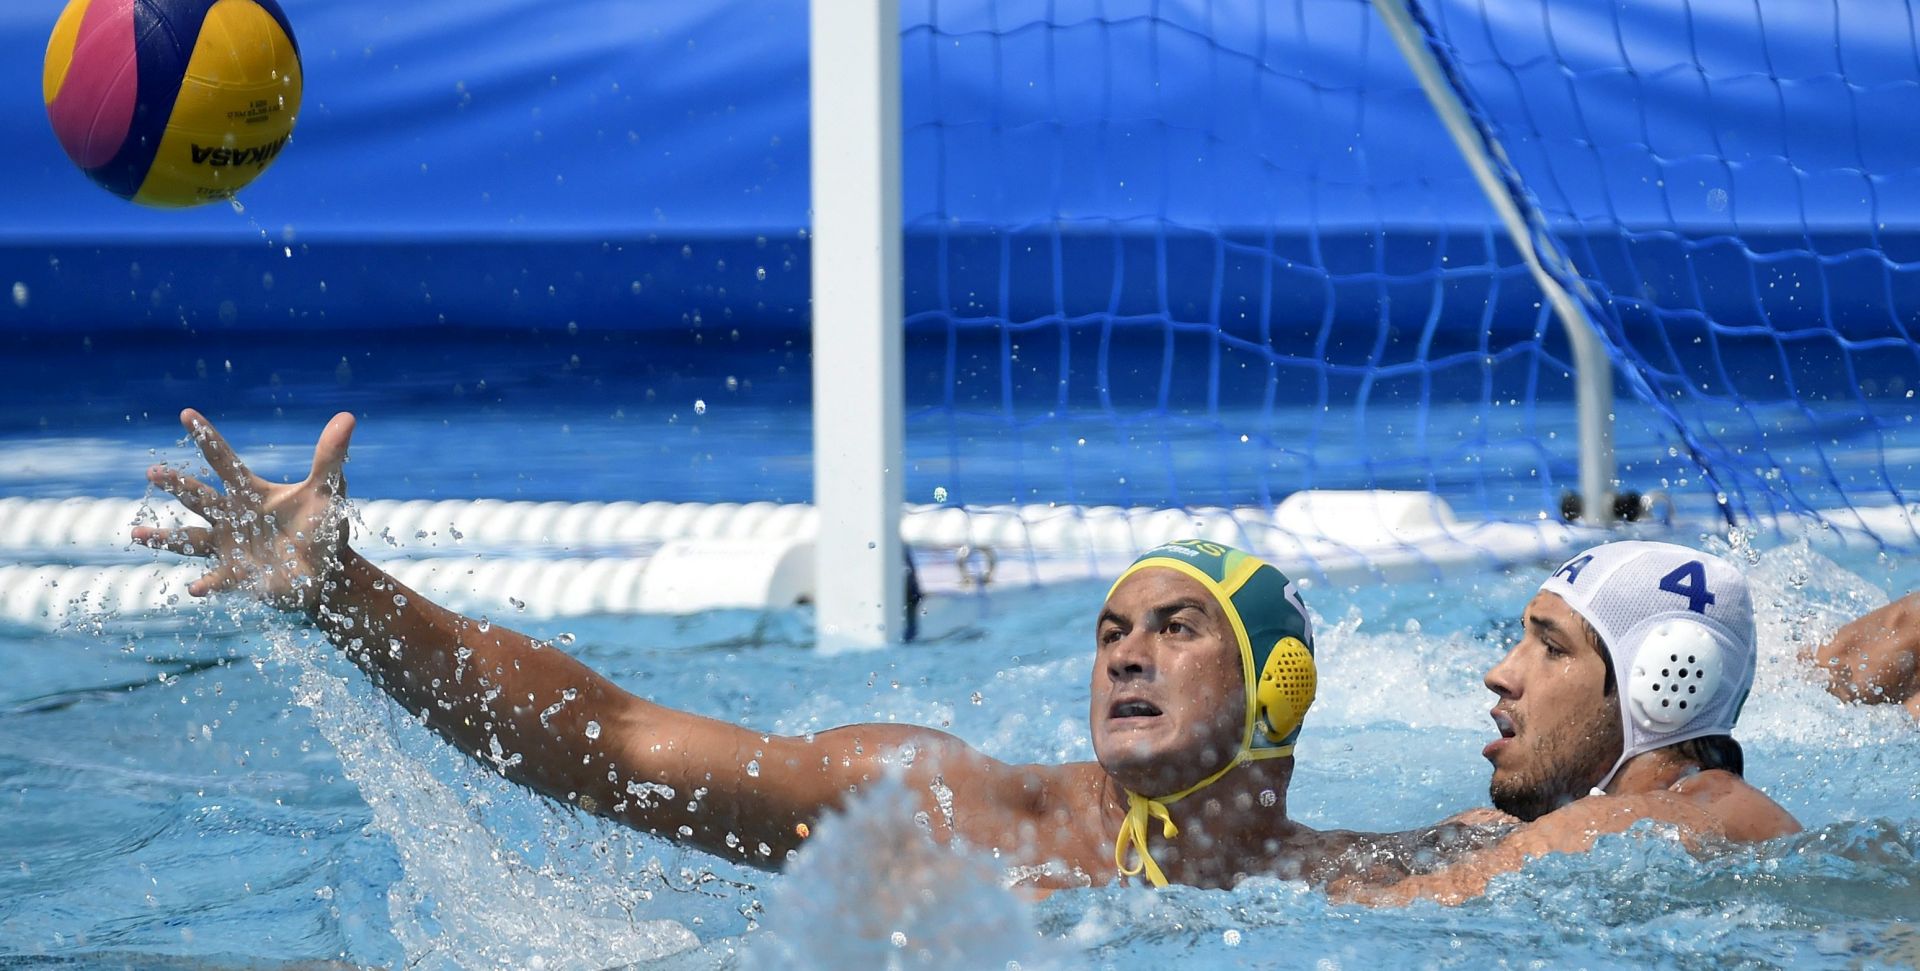 epa06105164 Joe Kayes of Australia (L) in action against Gustavo Coutinho of Brazil during the men's water polo Australia vs Brazil match for qualifying in the group of eight best teams of the 17th FINA Swimming World Championships in Hajos Alfred National Swimming Pool in Budapest, Hungary, 23 July 2017.  EPA/BALAZS CZAGANY HUNGARY OUT